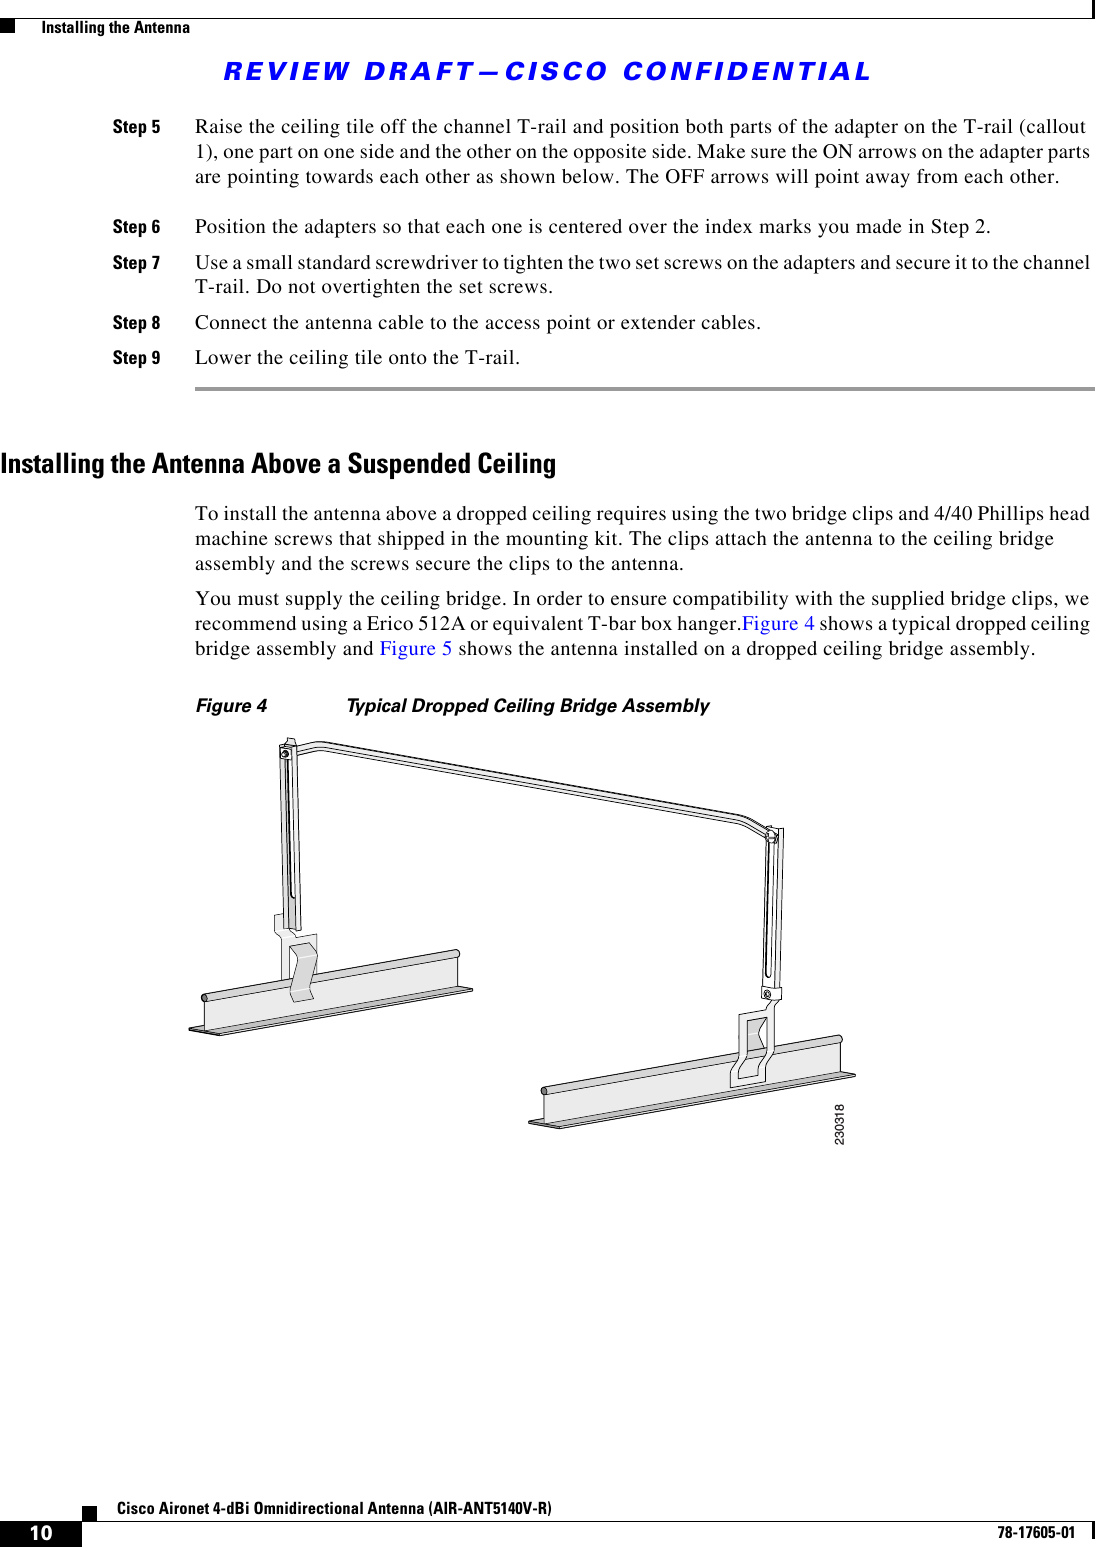 REVIEW DRAFT—CISCO CONFIDENTIAL10Cisco Aironet 4-dBi Omnidirectional Antenna (AIR-ANT5140V-R)78-17605-01  Installing the AntennaStep 5 Raise the ceiling tile off the channel T-rail and position both parts of the adapter on the T-rail (callout 1), one part on one side and the other on the opposite side. Make sure the ON arrows on the adapter parts are pointing towards each other as shown below. The OFF arrows will point away from each other.Step 6 Position the adapters so that each one is centered over the index marks you made in Step 2.Step 7 Use a small standard screwdriver to tighten the two set screws on the adapters and secure it to the channel T-rail. Do not overtighten the set screws.Step 8 Connect the antenna cable to the access point or extender cables.Step 9 Lower the ceiling tile onto the T-rail. Installing the Antenna Above a Suspended CeilingTo install the antenna above a dropped ceiling requires using the two bridge clips and 4/40 Phillips head machine screws that shipped in the mounting kit. The clips attach the antenna to the ceiling bridge assembly and the screws secure the clips to the antenna.You must supply the ceiling bridge. In order to ensure compatibility with the supplied bridge clips, we recommend using a Erico 512A or equivalent T-bar box hanger.Figure 4 shows a typical dropped ceiling bridge assembly and Figure 5 shows the antenna installed on a dropped ceiling bridge assembly.Figure 4 Typical Dropped Ceiling Bridge Assembly230318